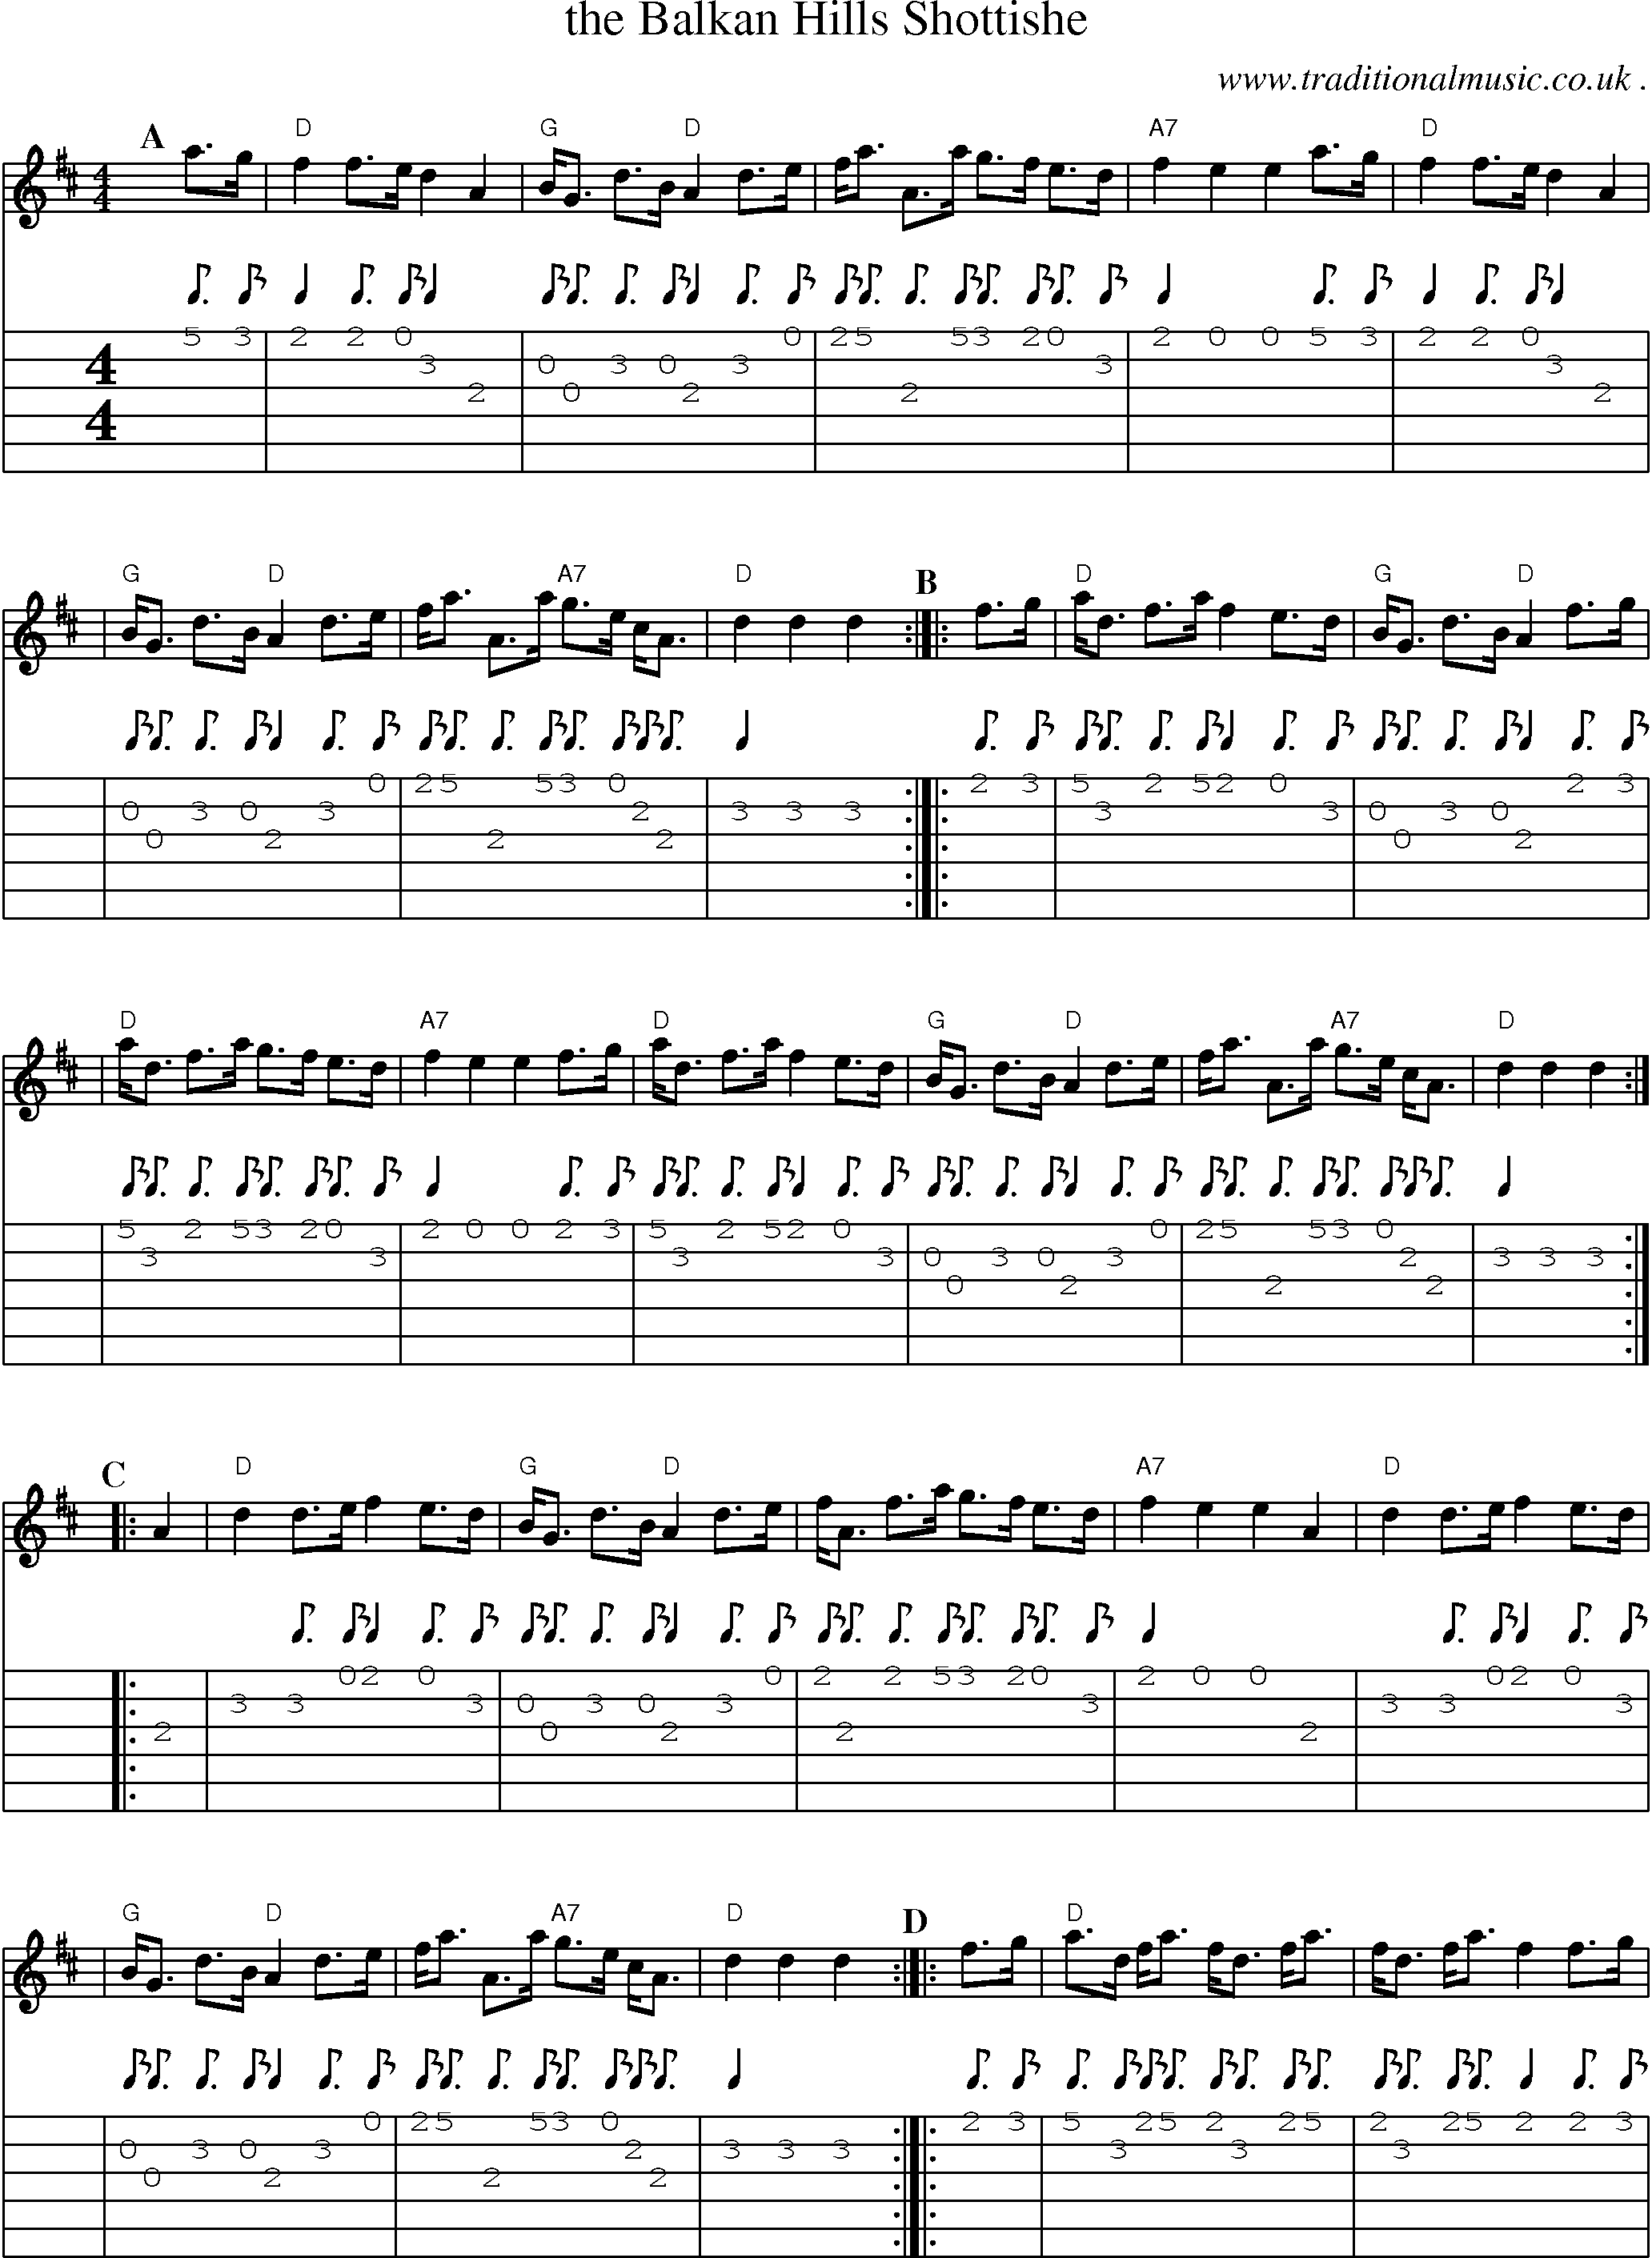 Sheet-music  score, Chords and Guitar Tabs for The Balkan Hills Shottishe